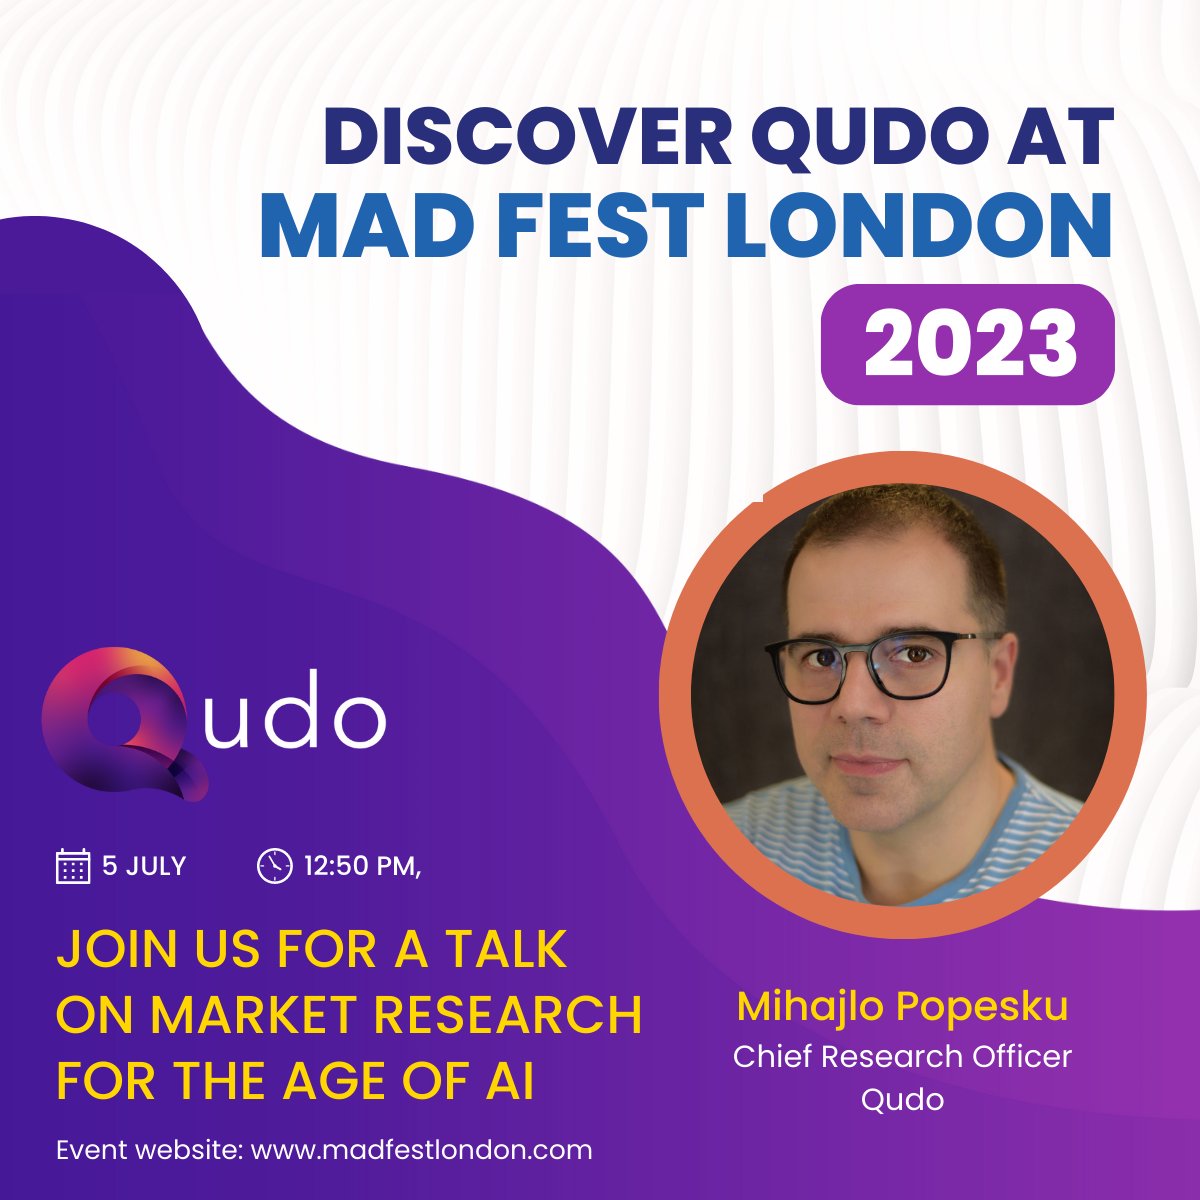 Exciting news! Our Chief Research Officer, Mihajlo Popesku, will be speaking at the Brand & Creative stage at MAD Fest in London on July 5th. He'll be sharing insights on Qudo and market research. Don't miss it! #MADFest #marketresearch #Qudo